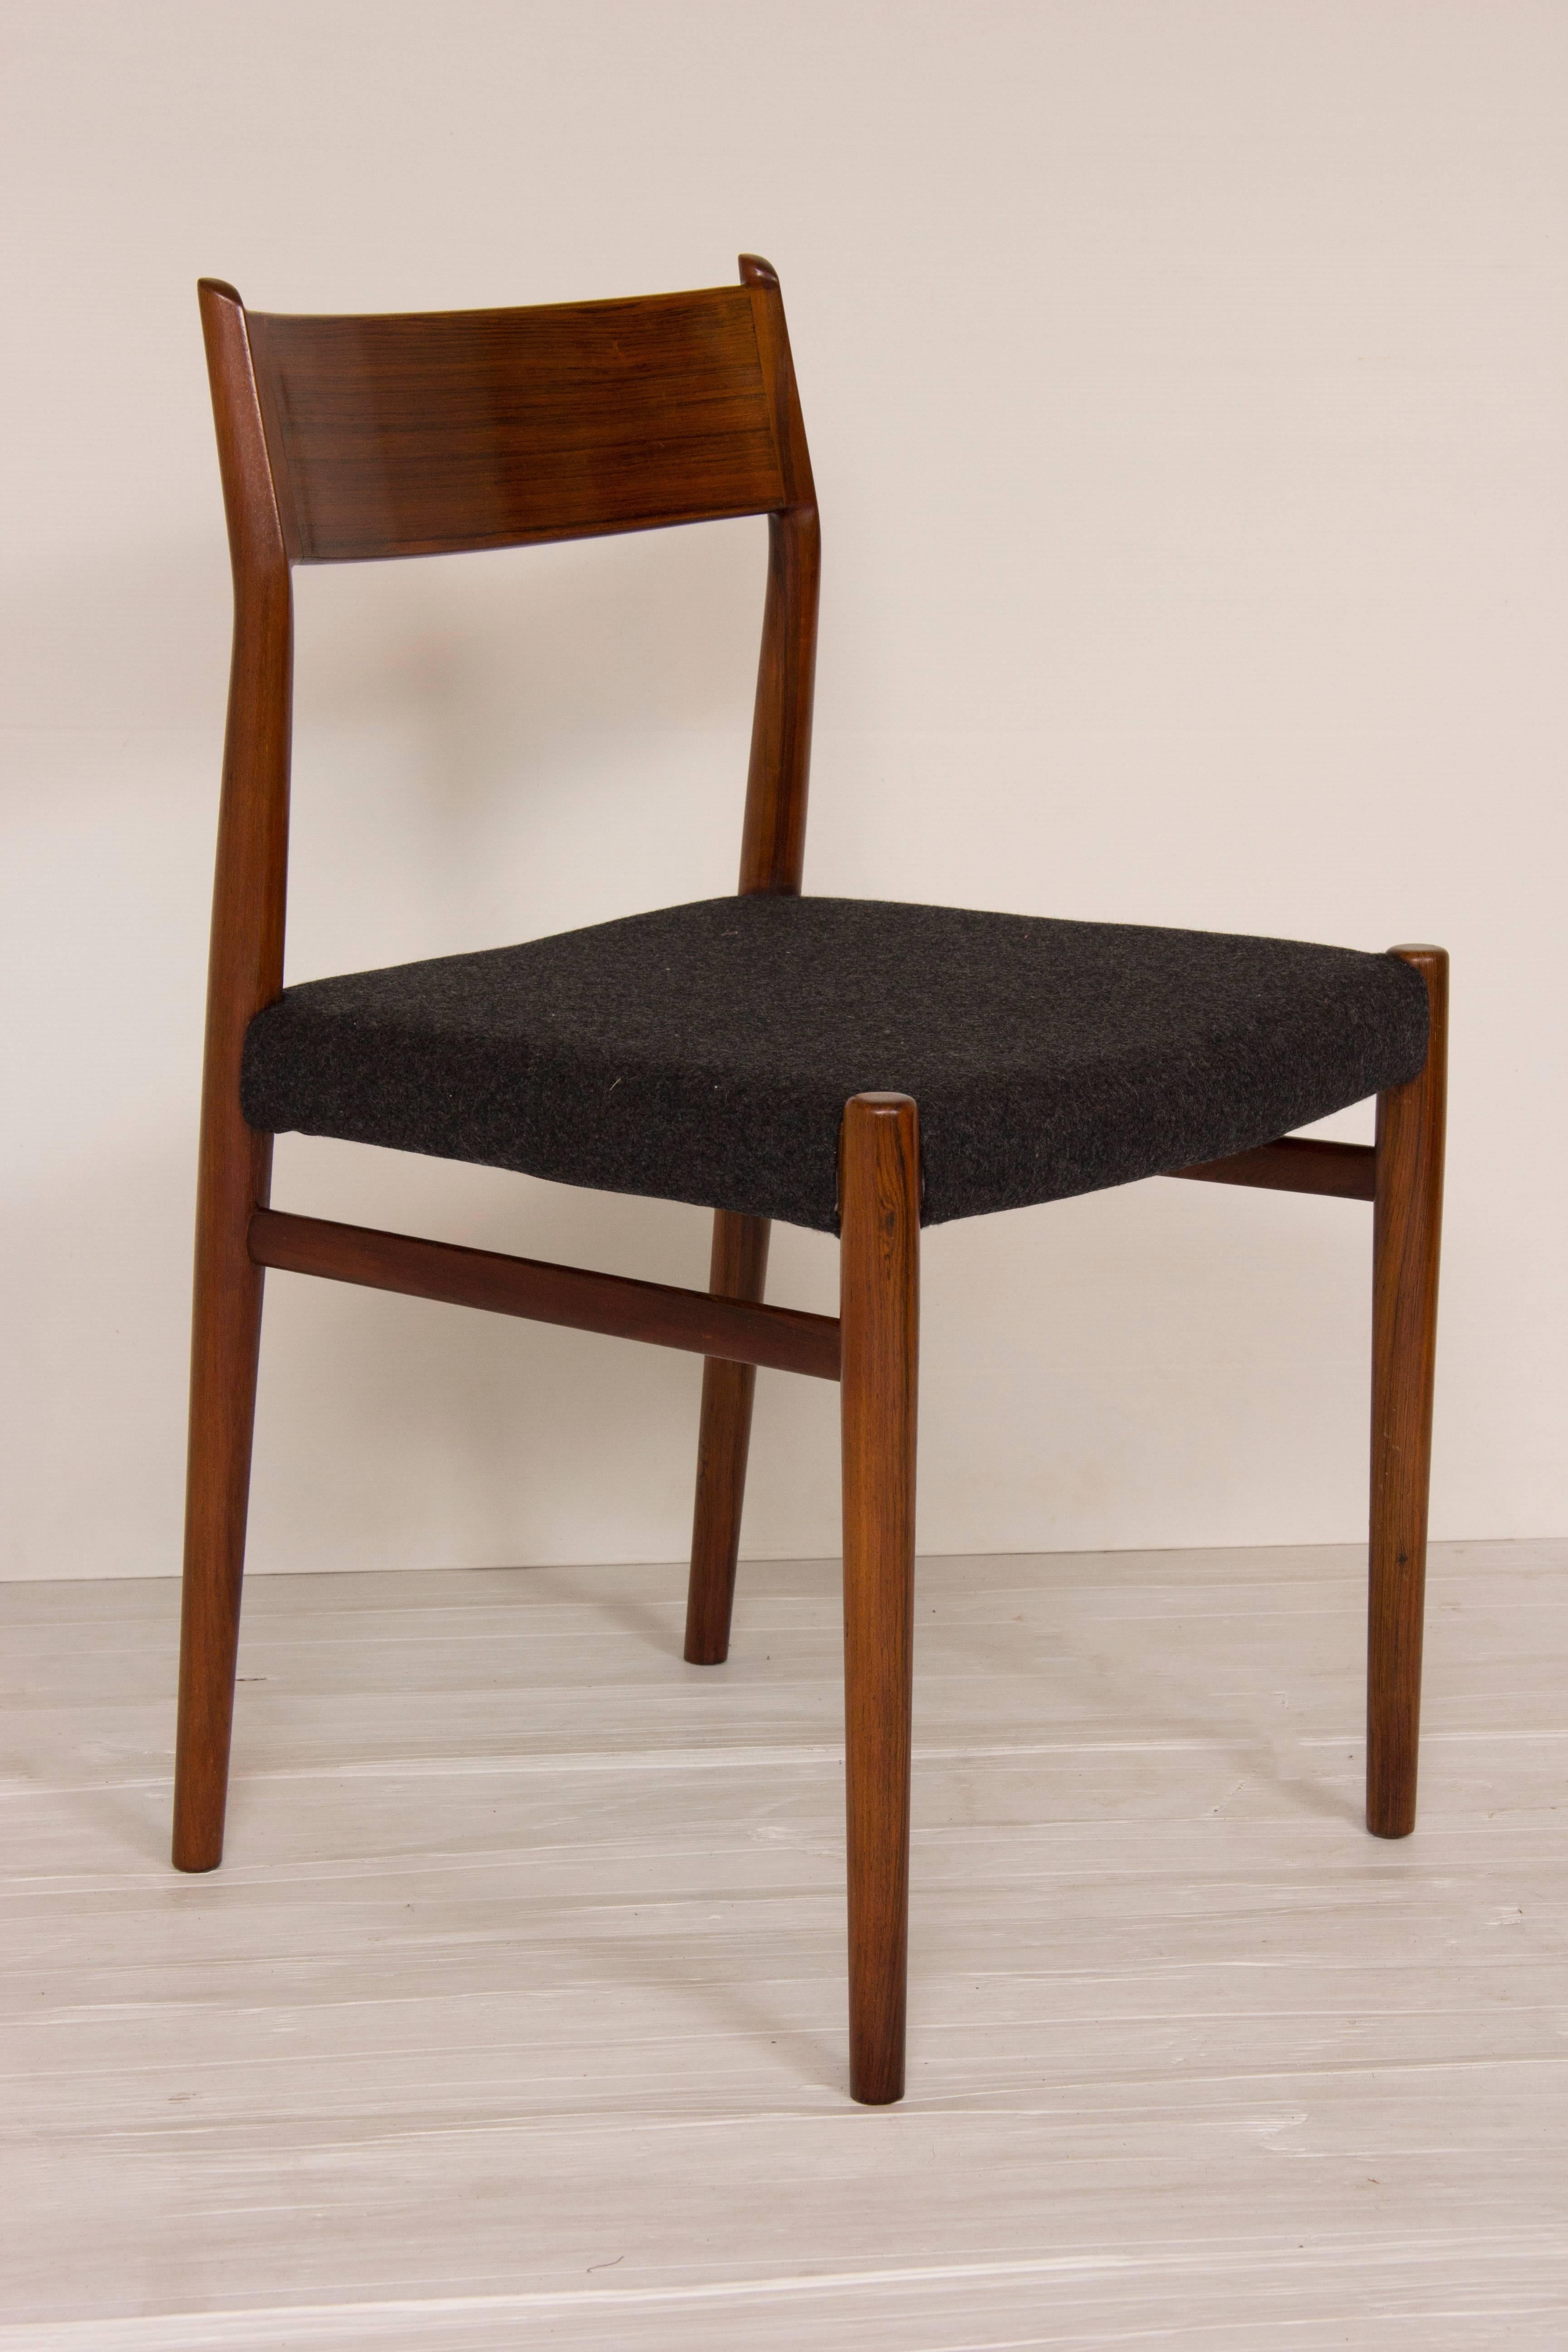 Set of ten Arne Vodder rosewood dining chairs. Model number 418. Upholstered in charcoal grey wool fabric.